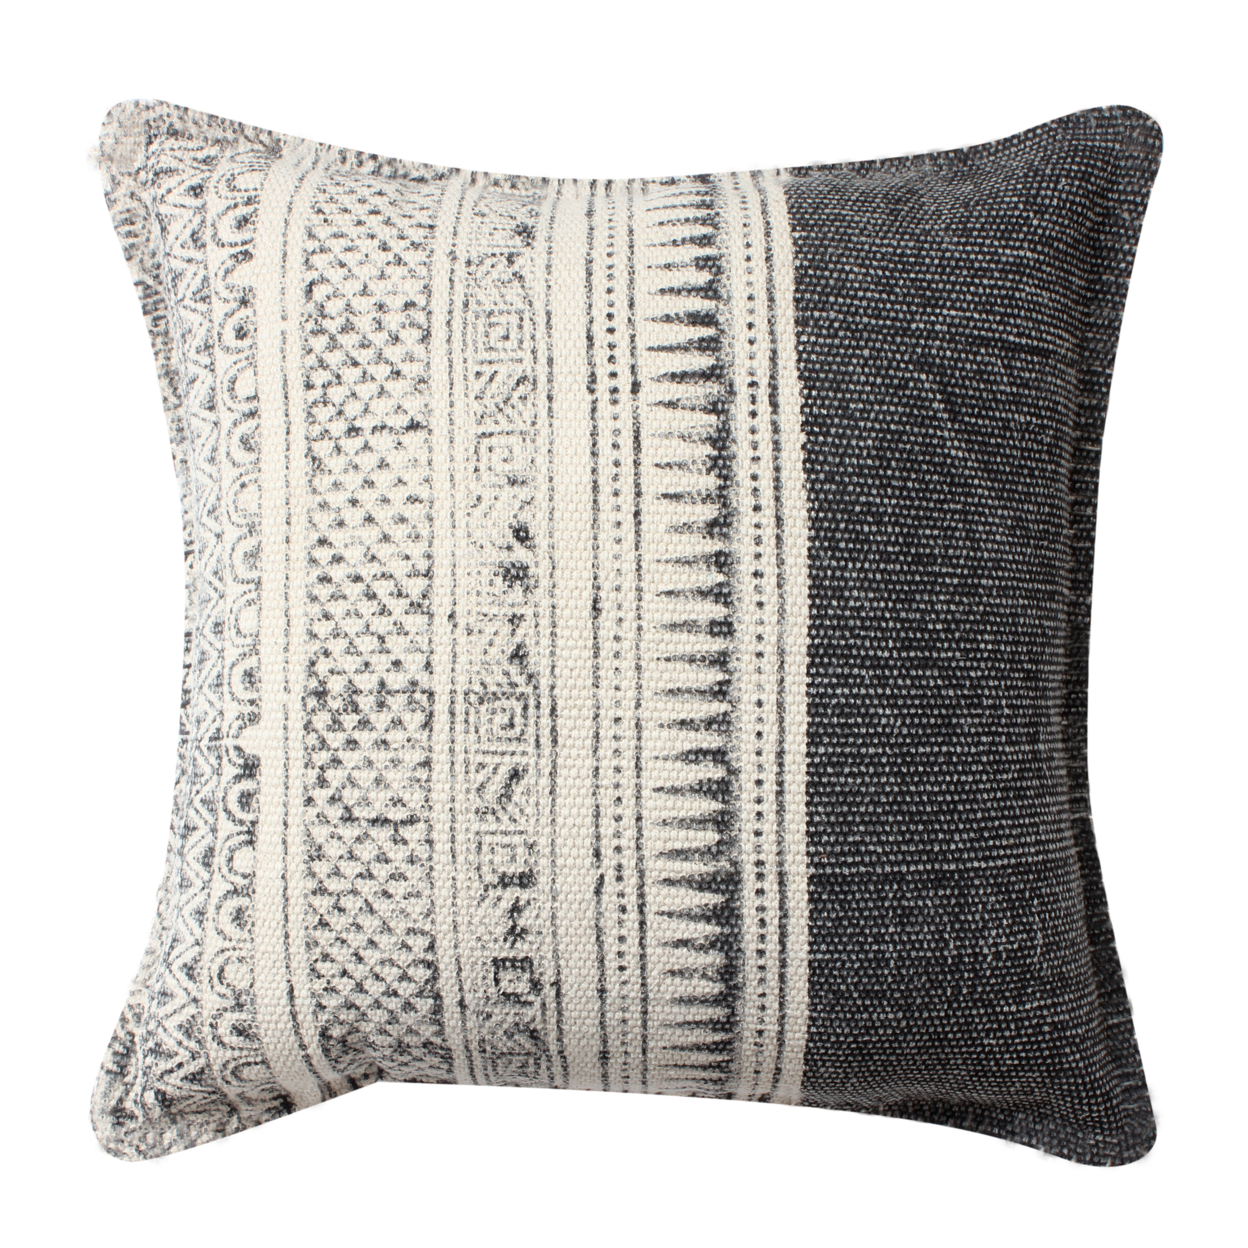 18 X 18 Square Handwoven Accent Throw Pillow, Polycotton Dhurrie, Kilim Pattern Front, Set Of 2, White, Gray